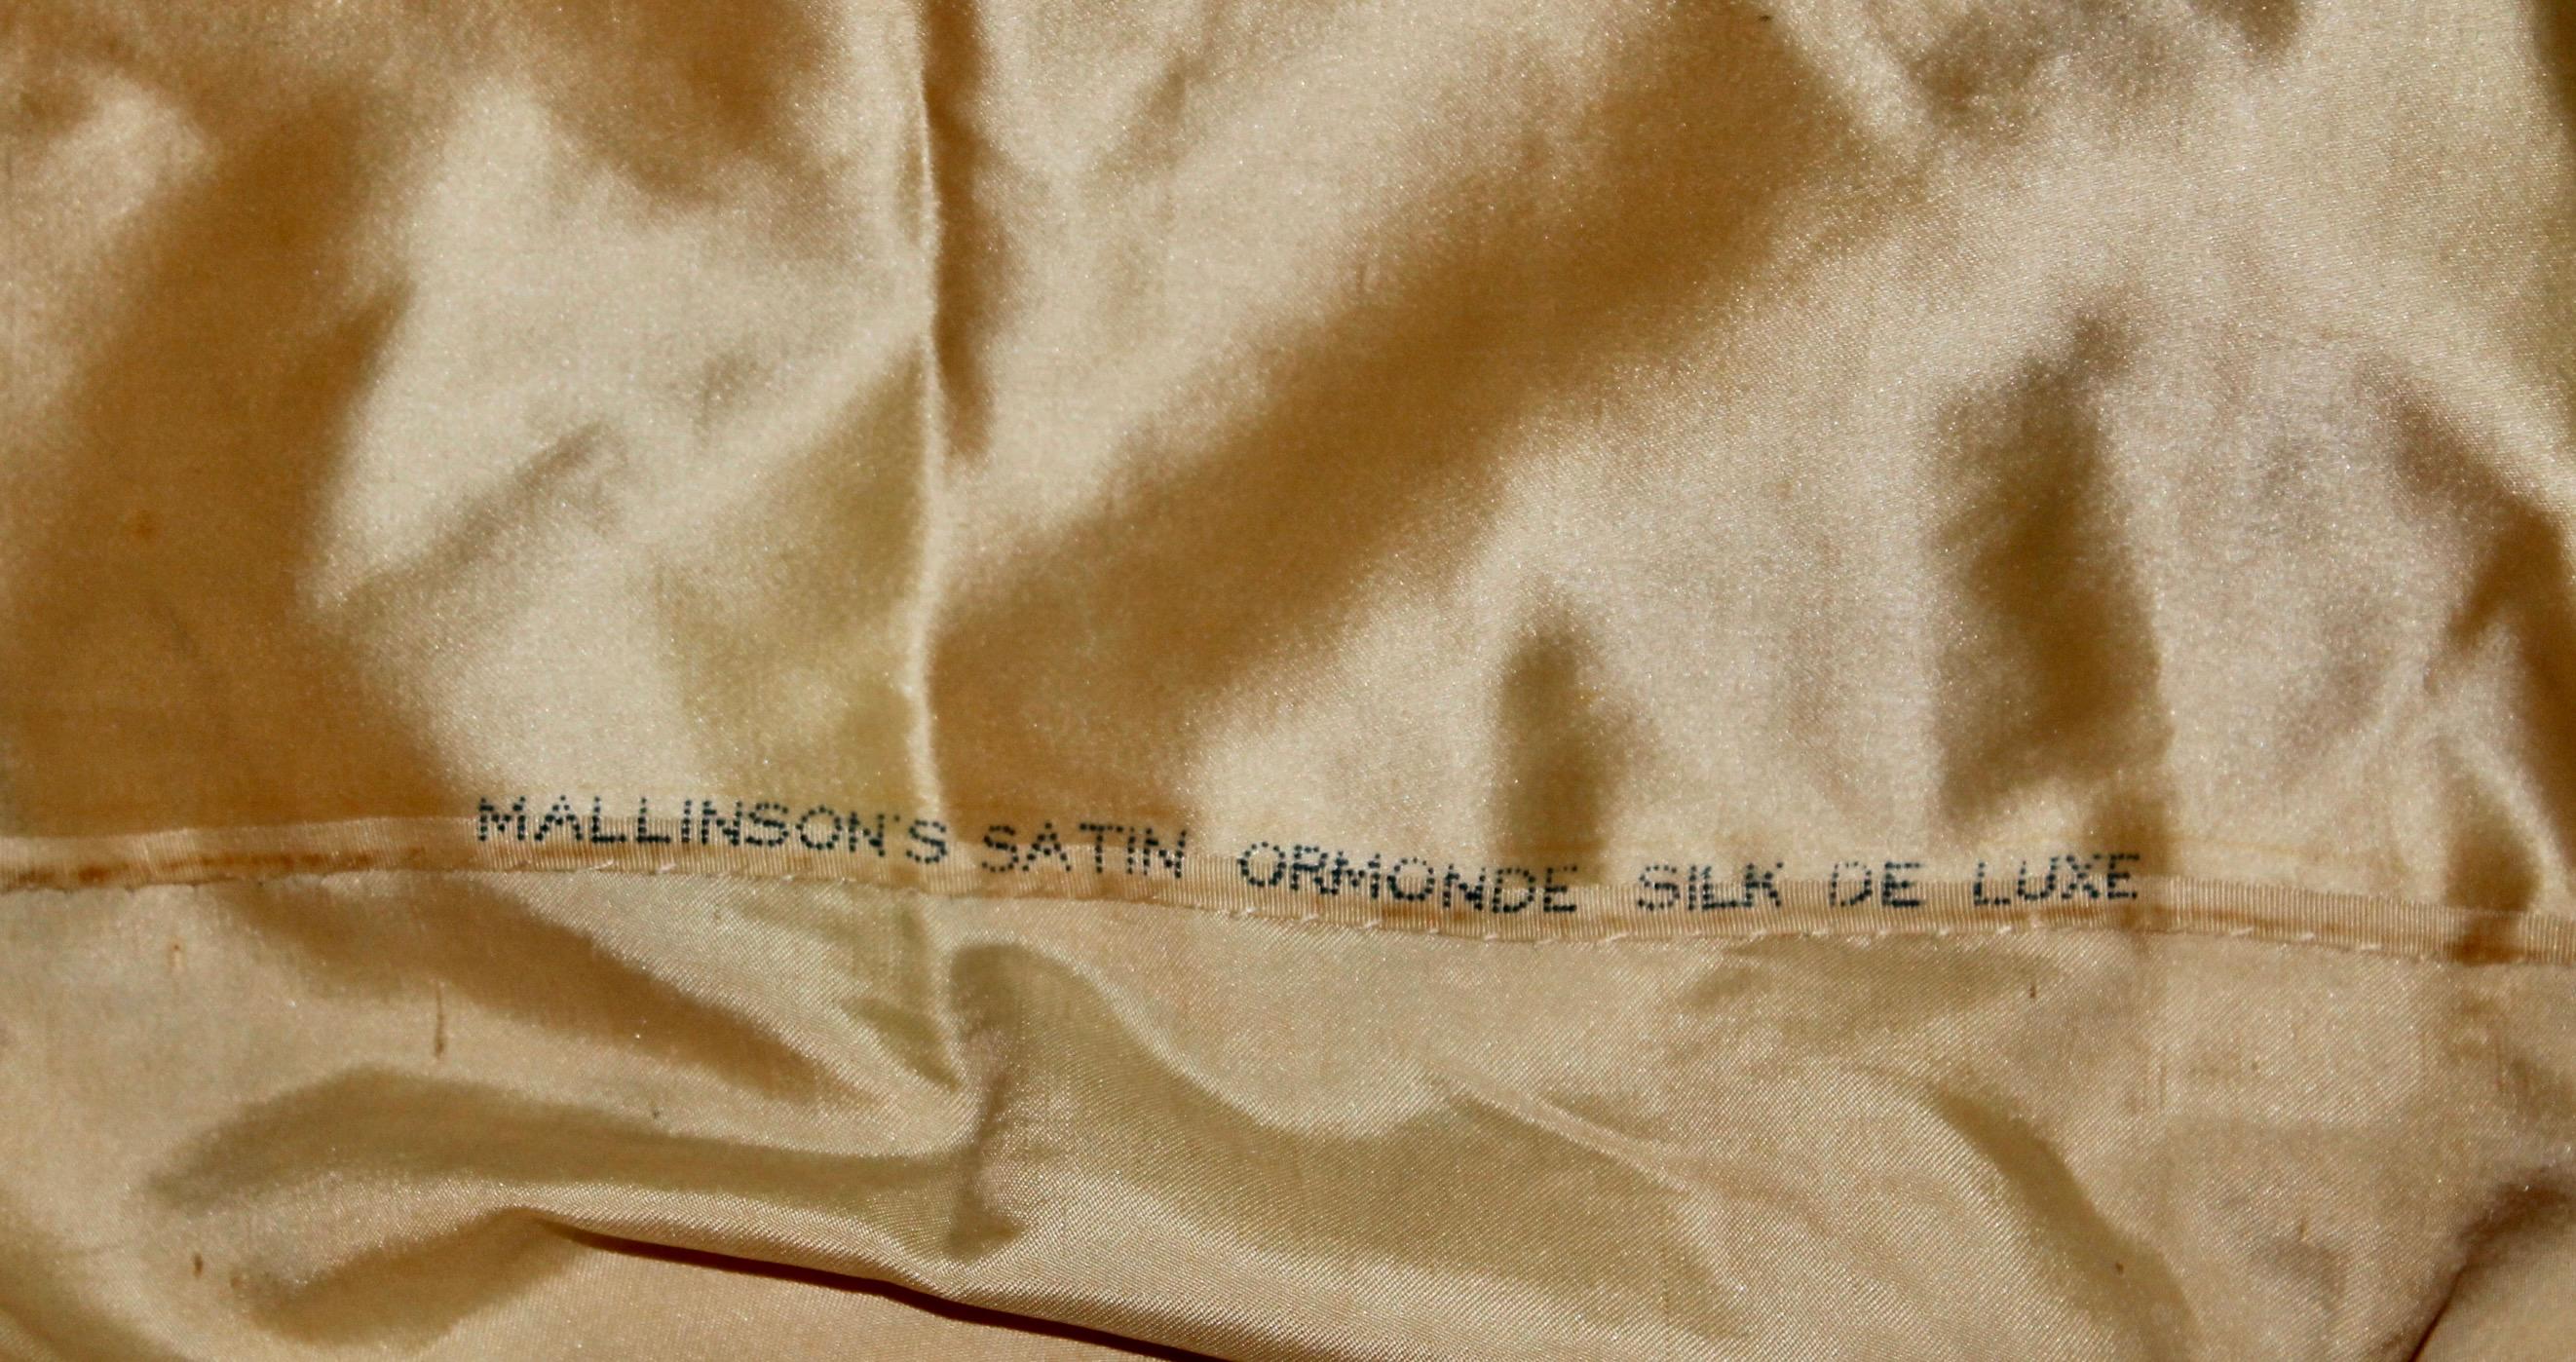 Of basically an indescribable golden yellow, and constructed of the finest Satin/Silk, a beautiful and complex example of 'Belle Epoque' elegance. Stamped: MALLINSON'S SATIN ORMANDE SILK DE LUXE